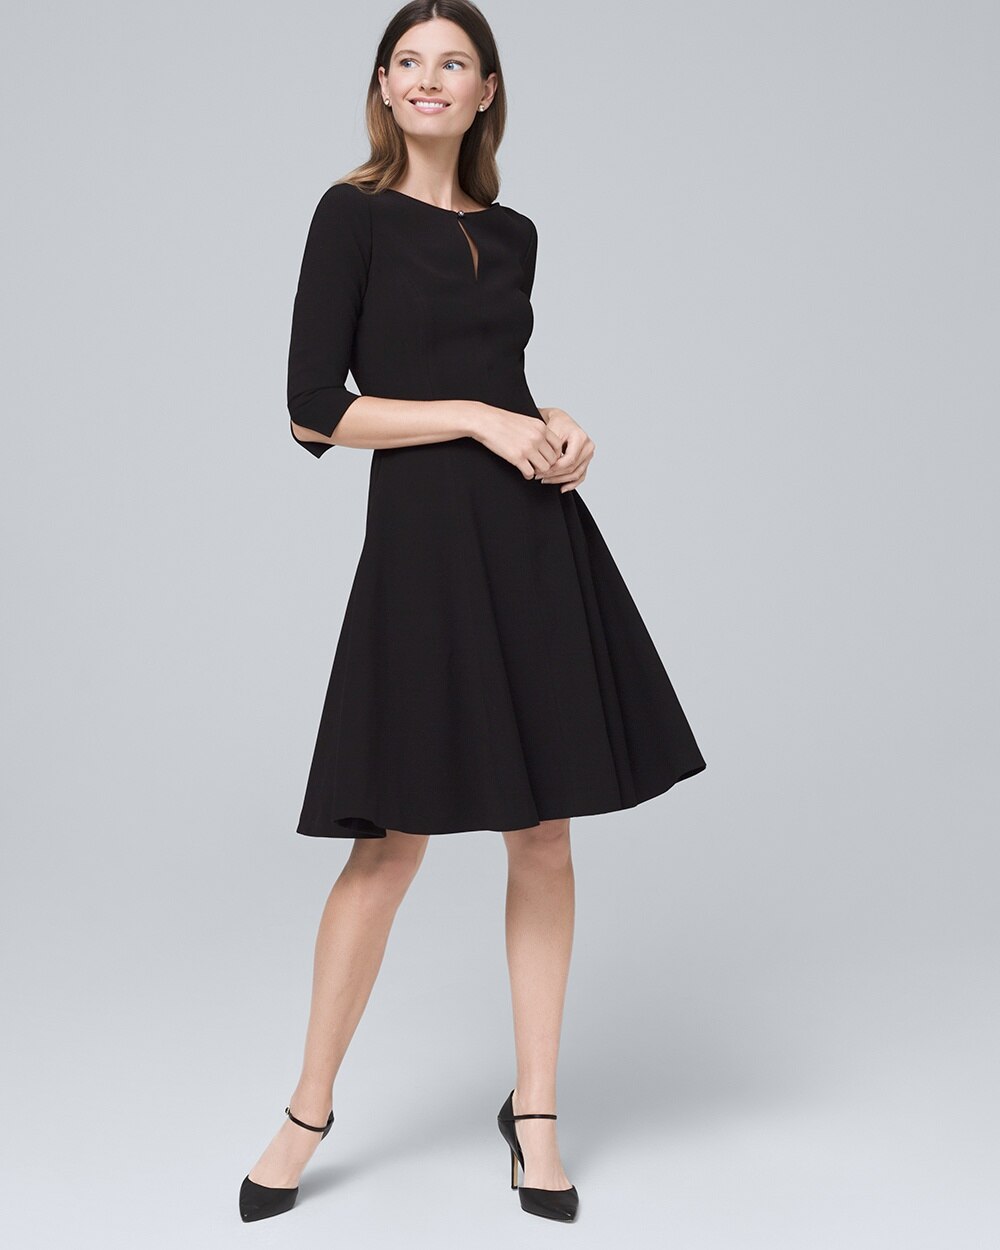 petite fit and flare dresses with sleeves